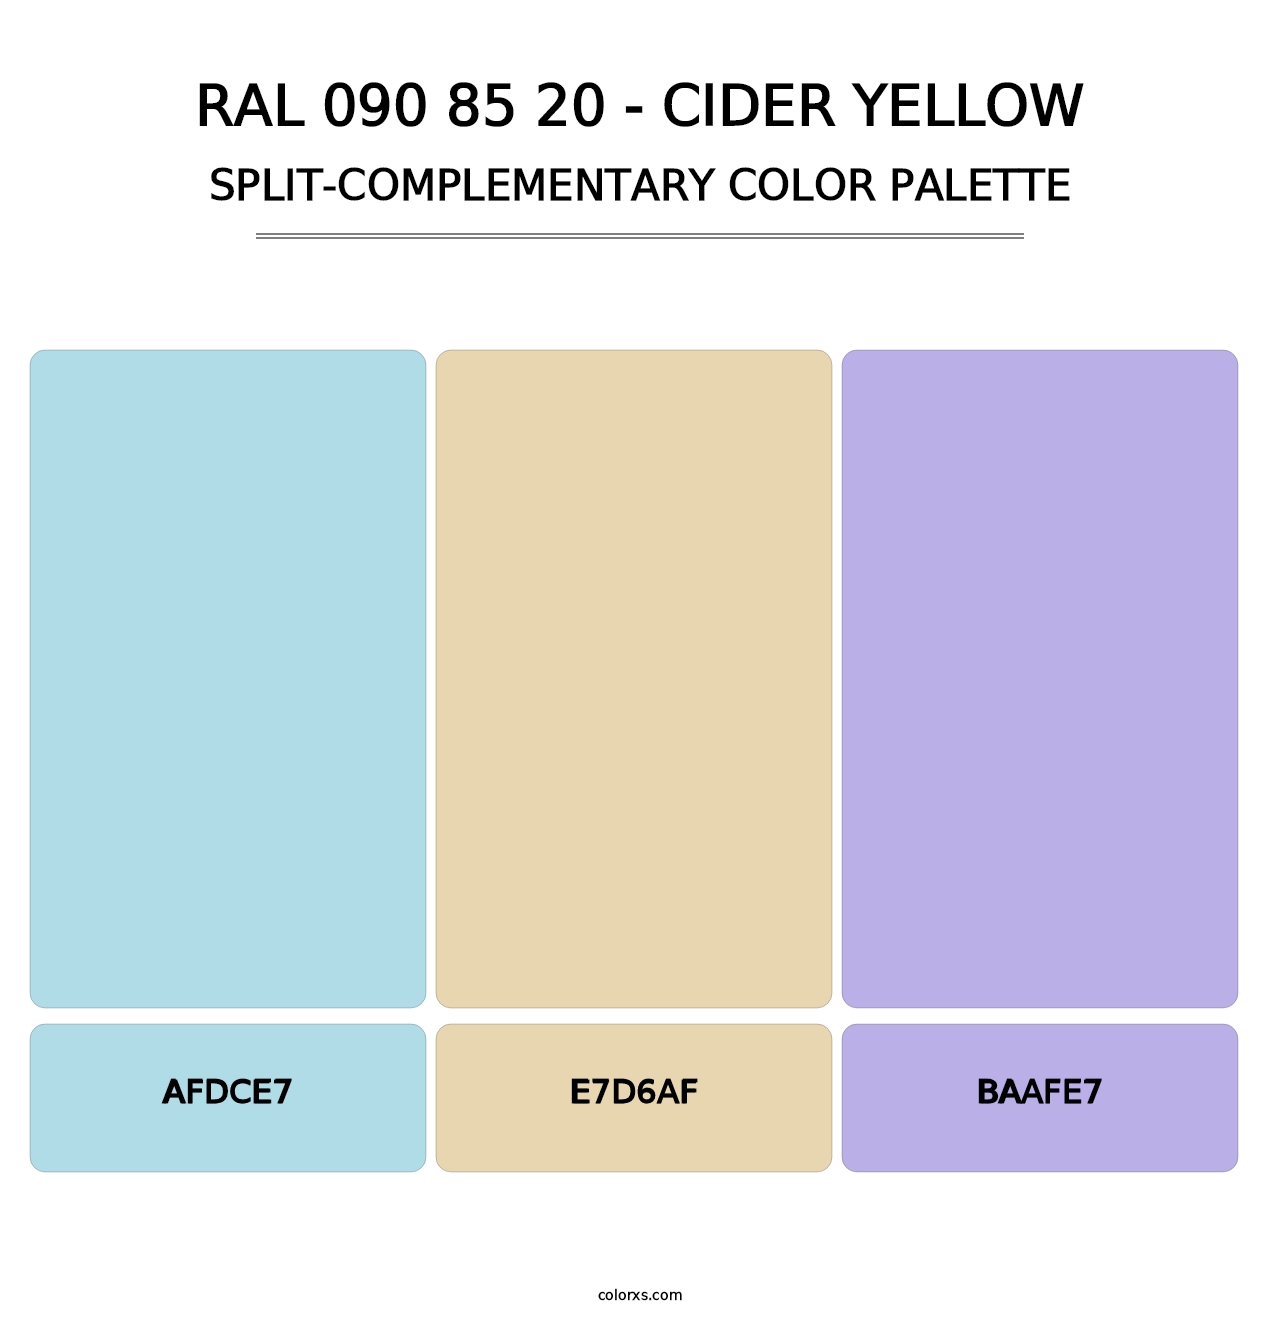 RAL 090 85 20 - Cider Yellow - Split-Complementary Color Palette